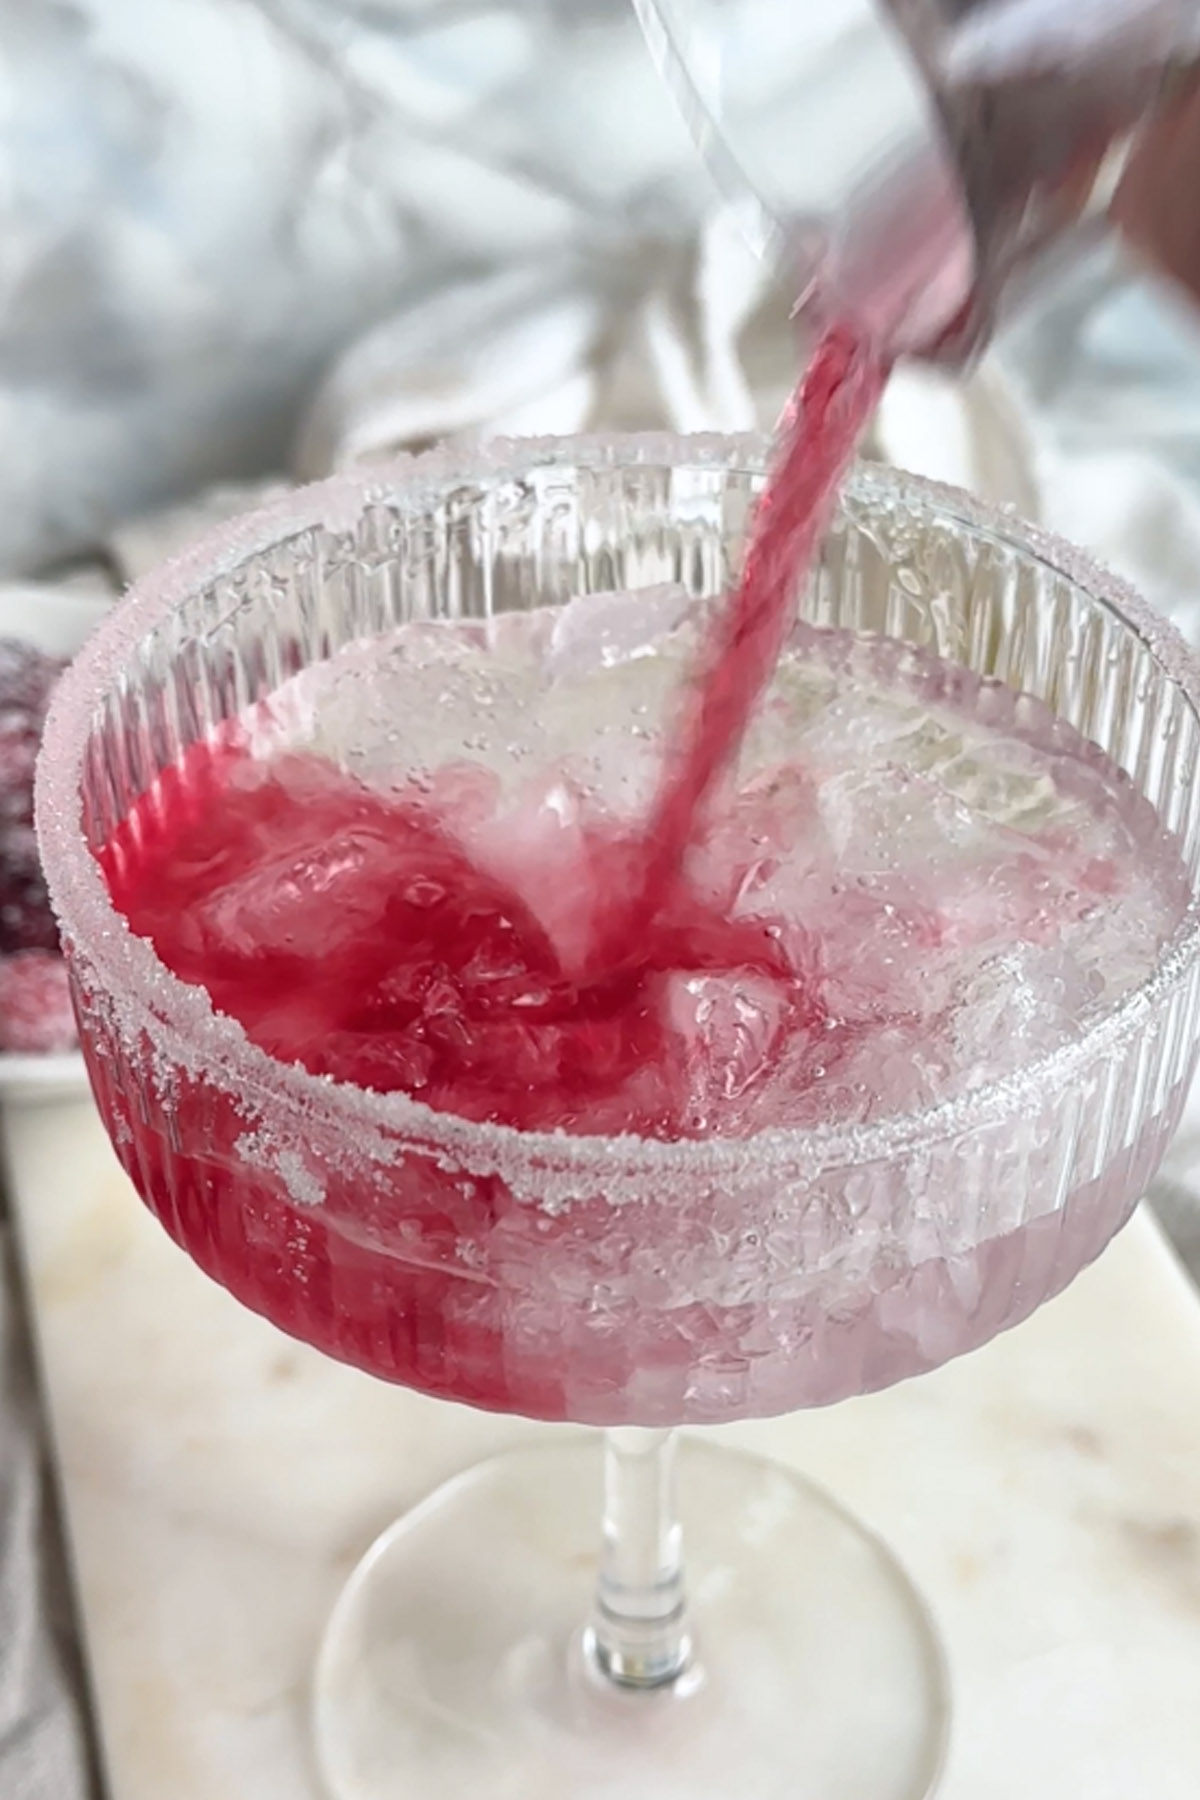 Cranberry juice is poured into a glass with ice.